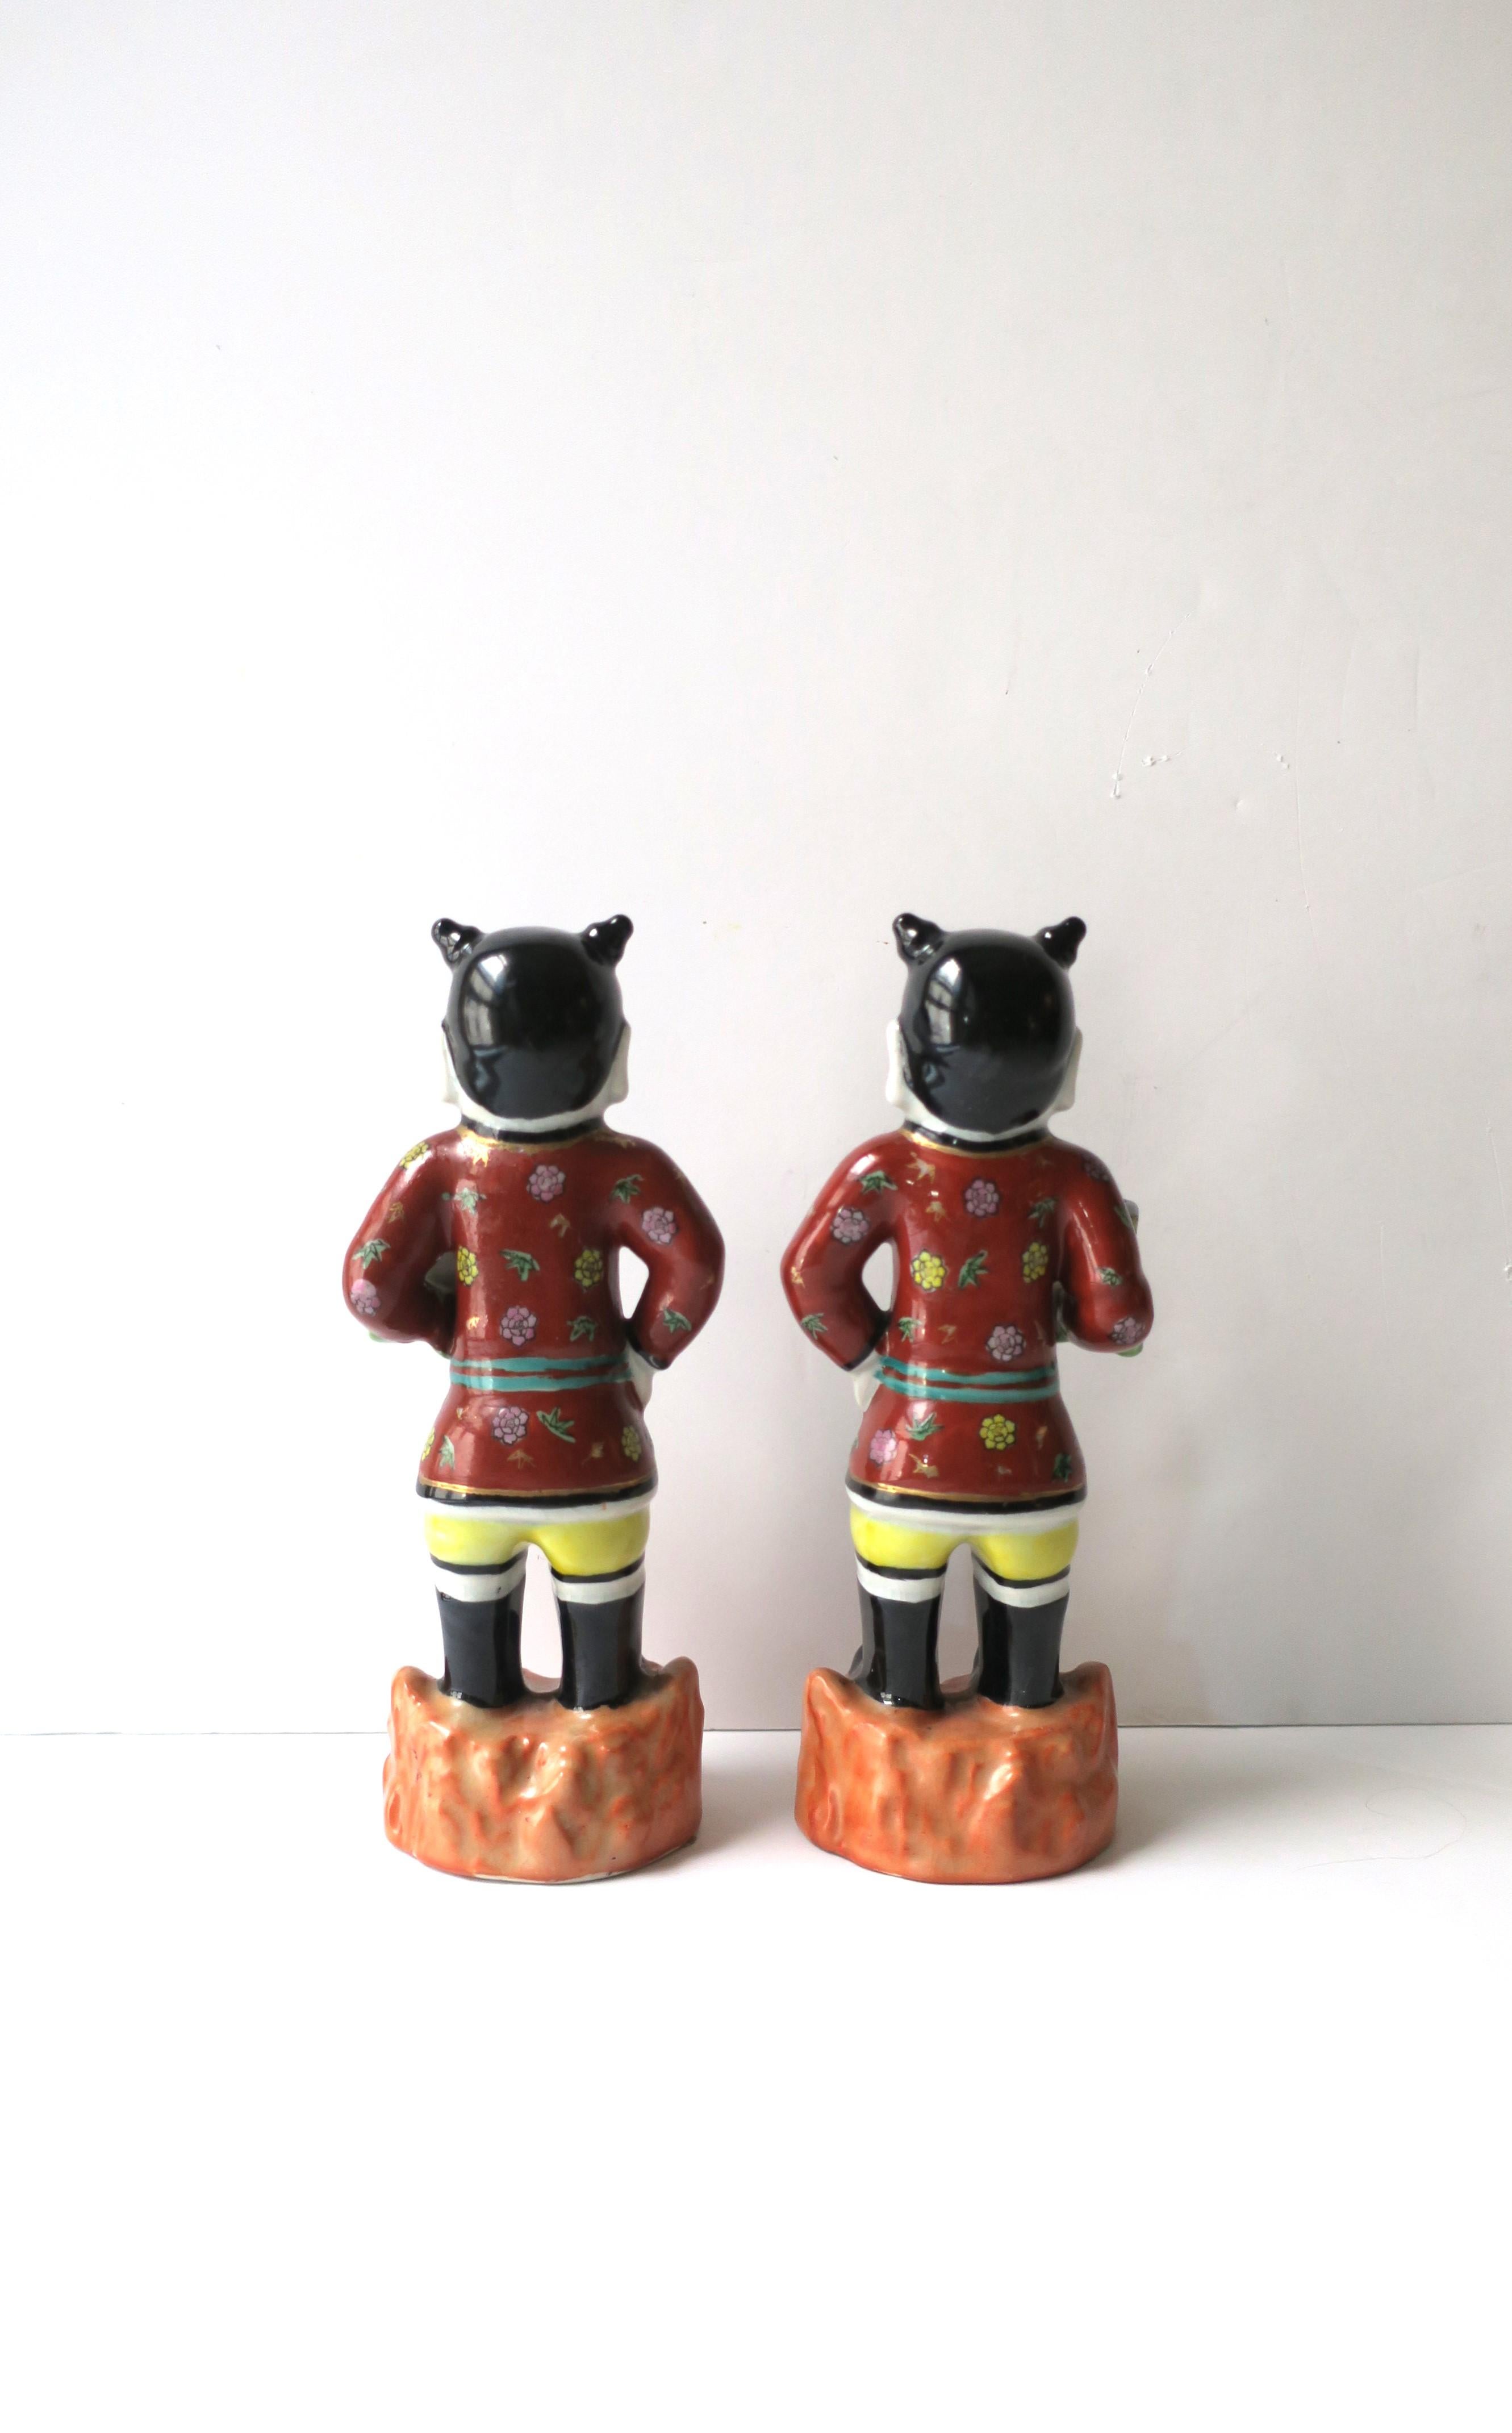 Chinoiserie Style Ceramic Male Figures Hand Painted Decorative Objects, Pair For Sale 3